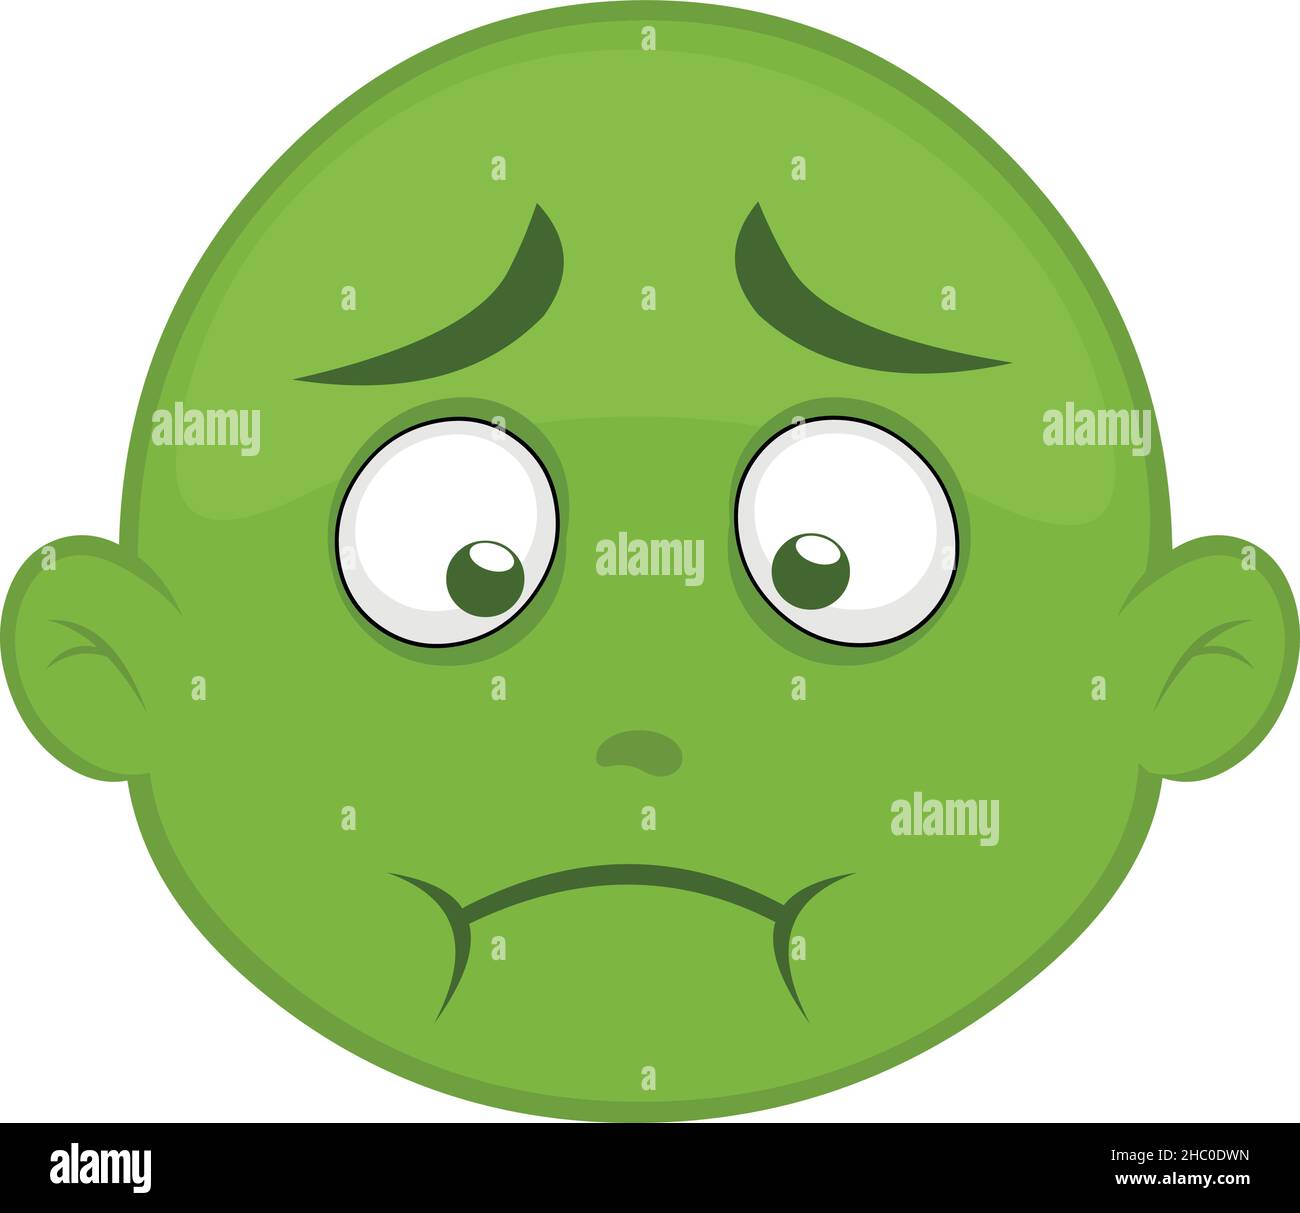 Vector illustration of the face of a bald and yellow character with a disgusted expression, throwing up Stock Vector